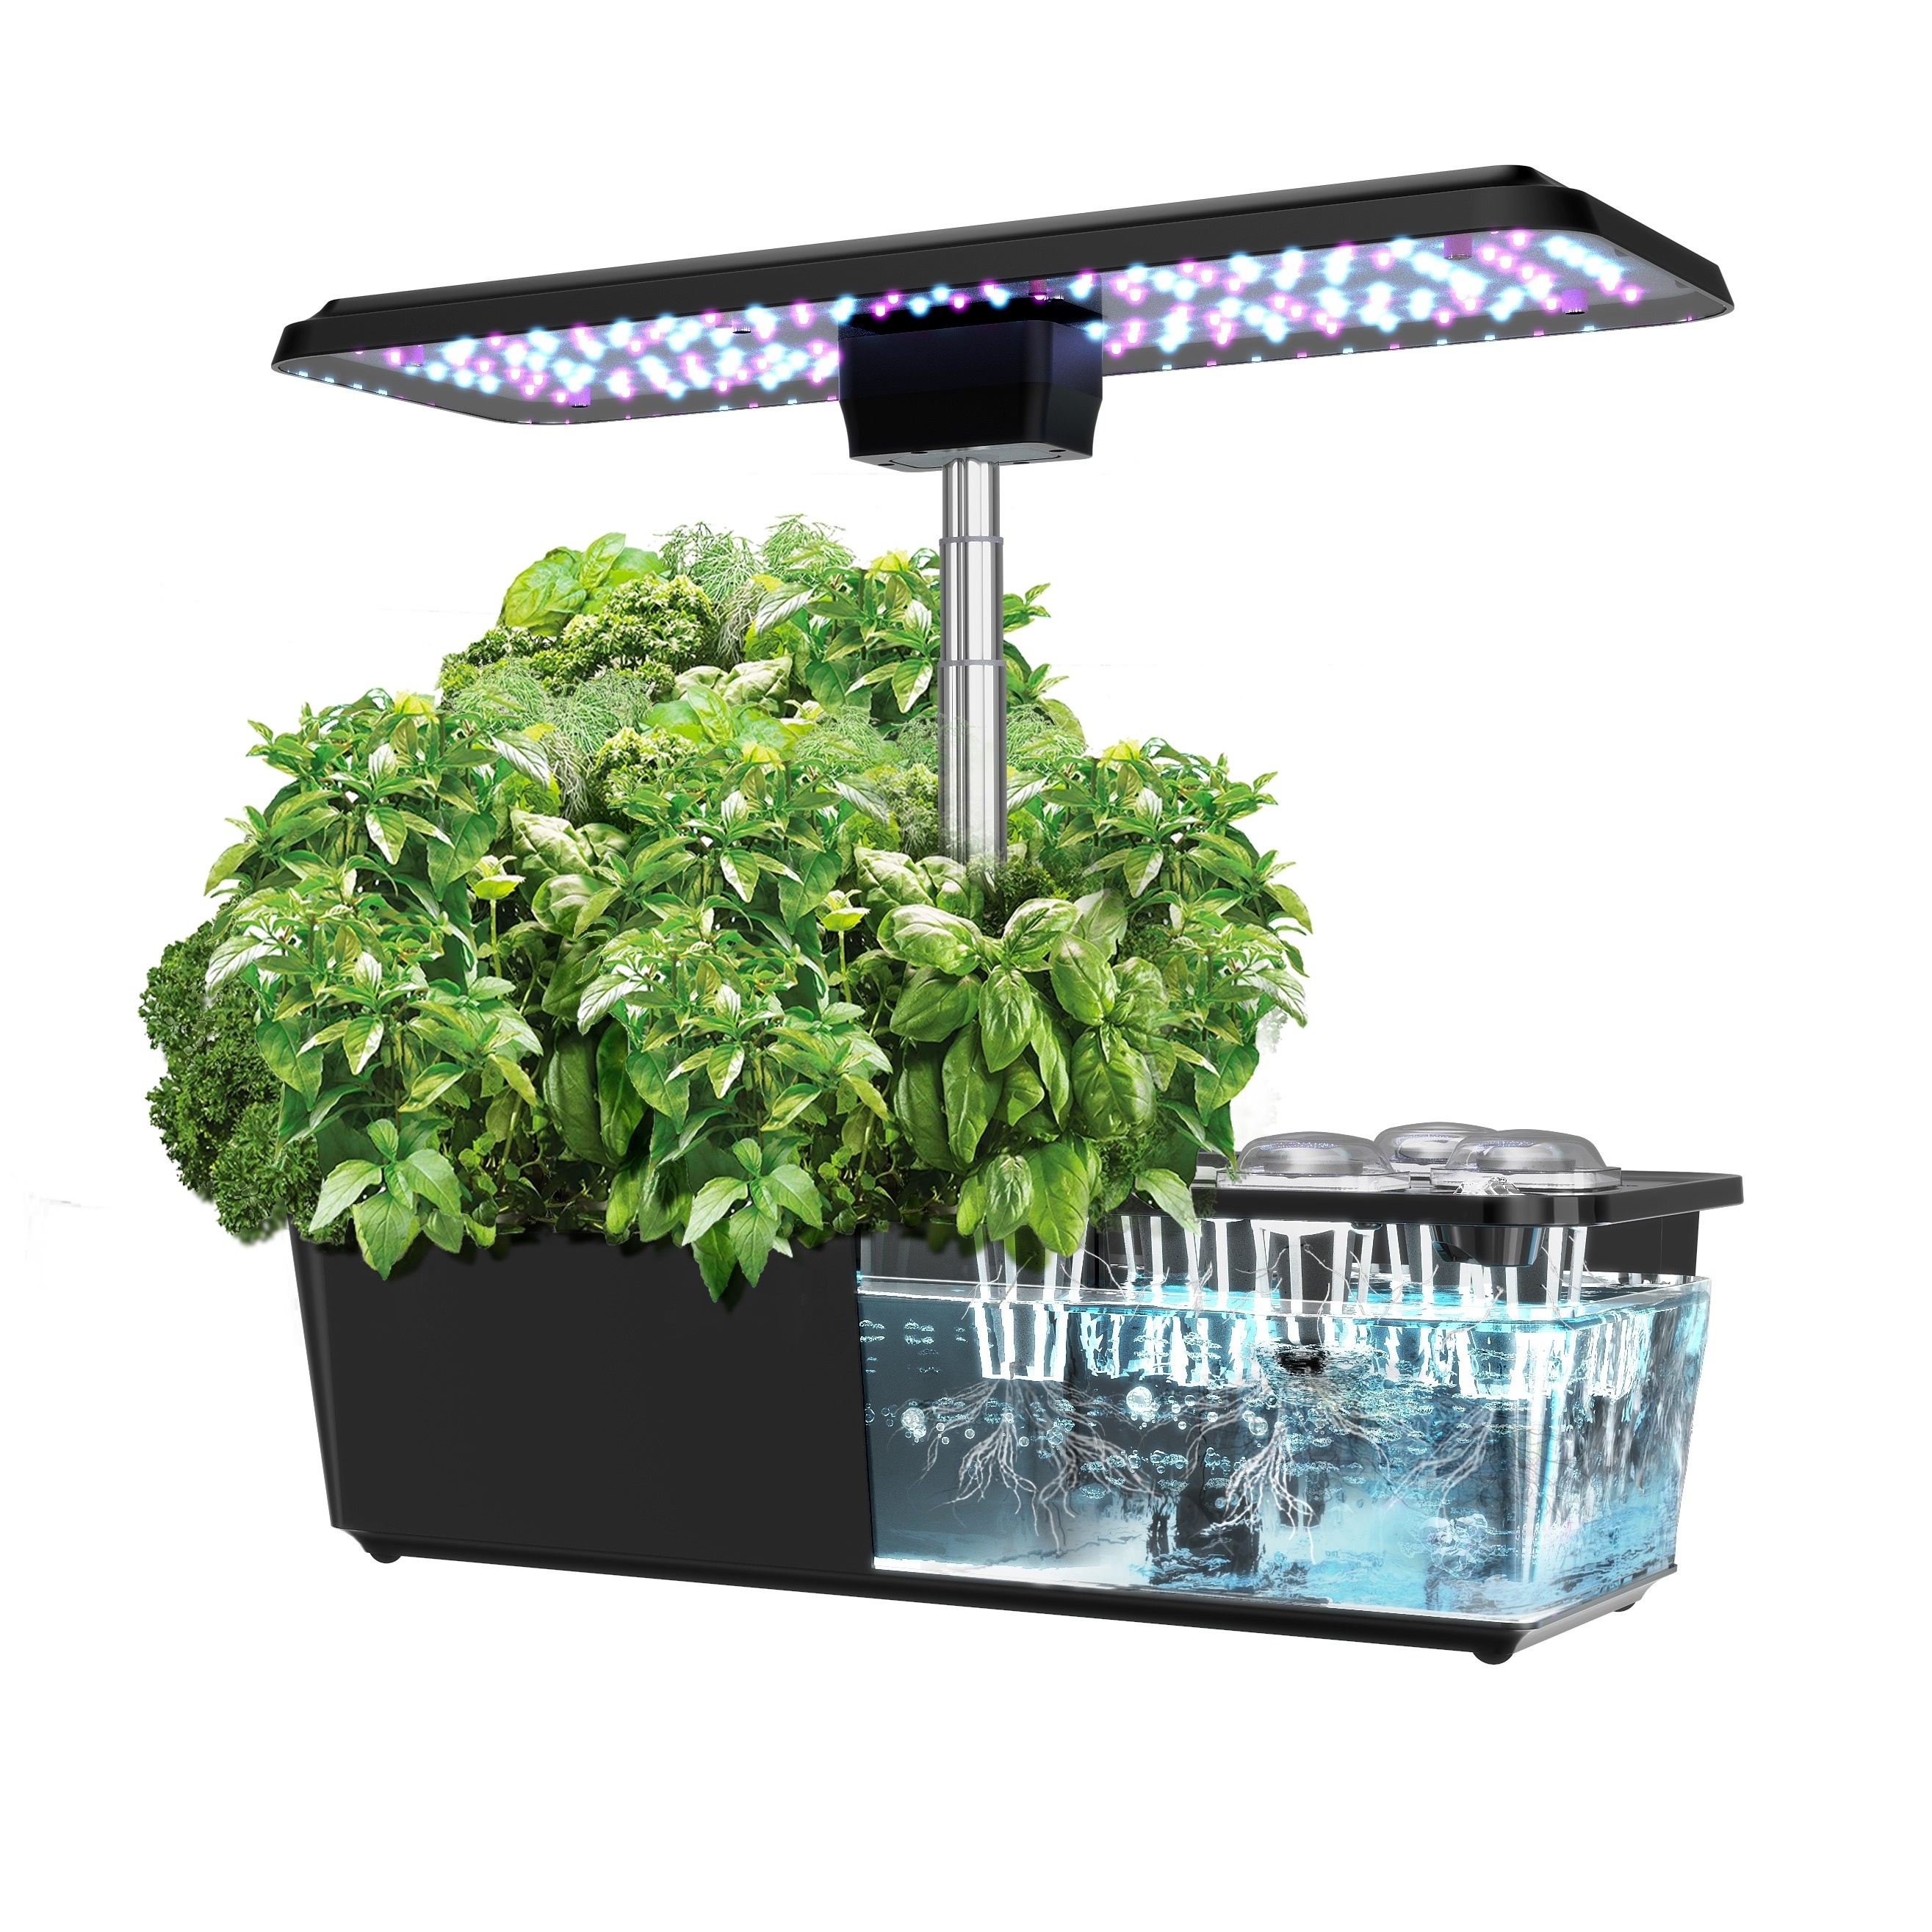 

12-pod Hydroponics Growing System - Indoor Greenhouse With 36w 5-color Full Spectrum Led, Automatic Timer, Noise Reduction Pump, Up To 23" Growth Height